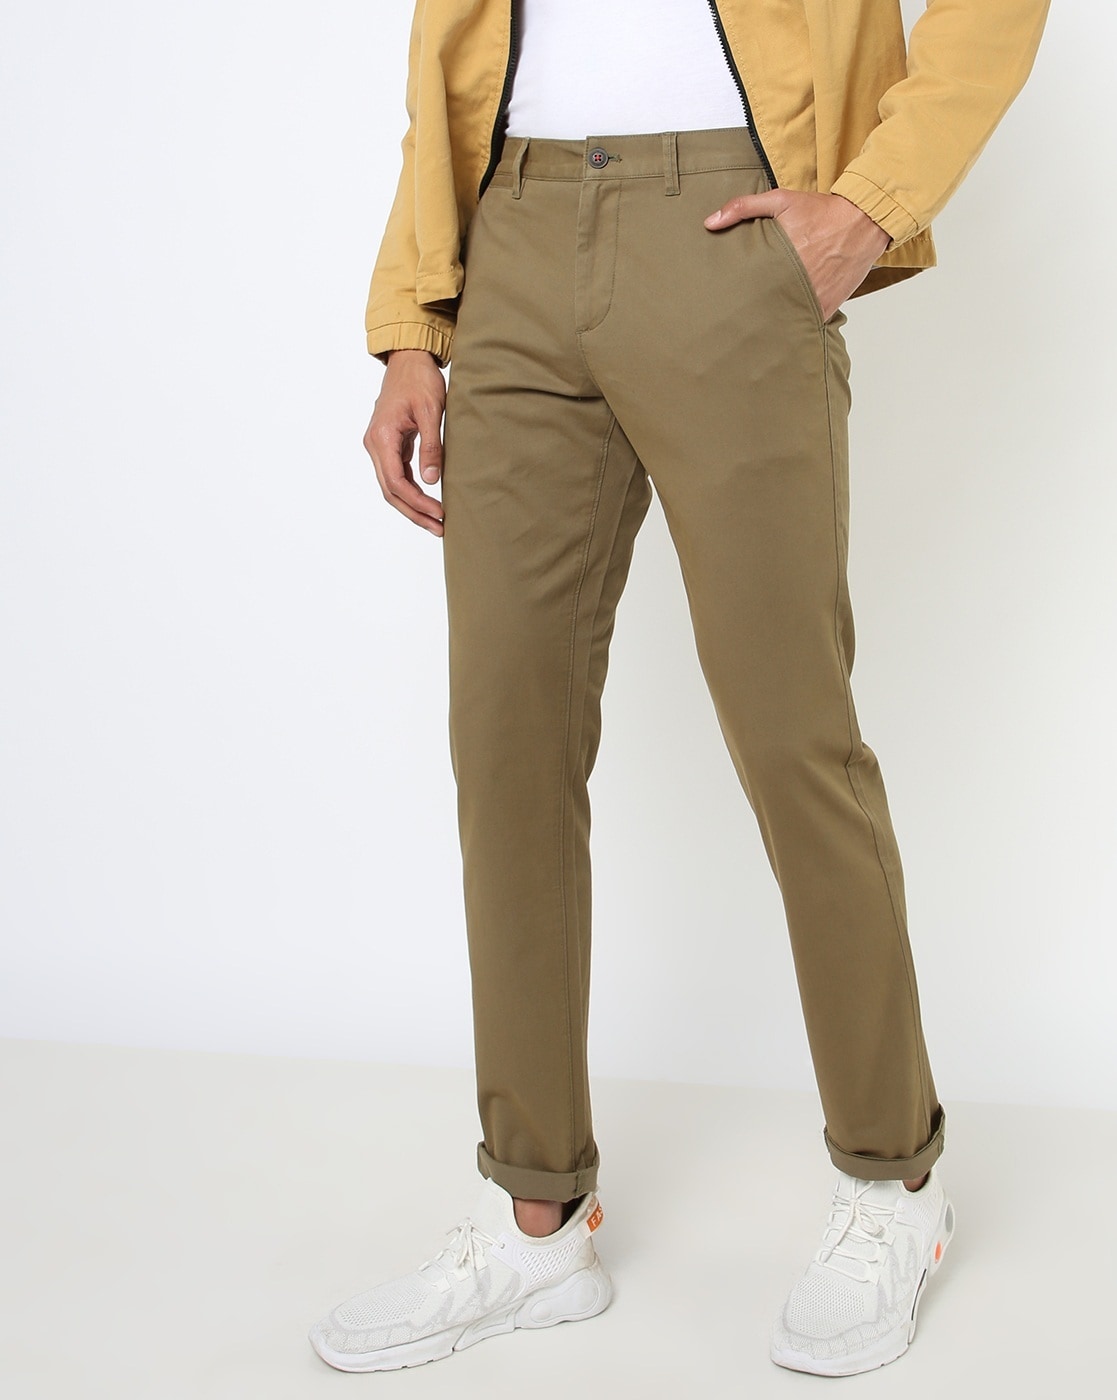 Aggregate 75+ netplay trousers online latest - in.duhocakina